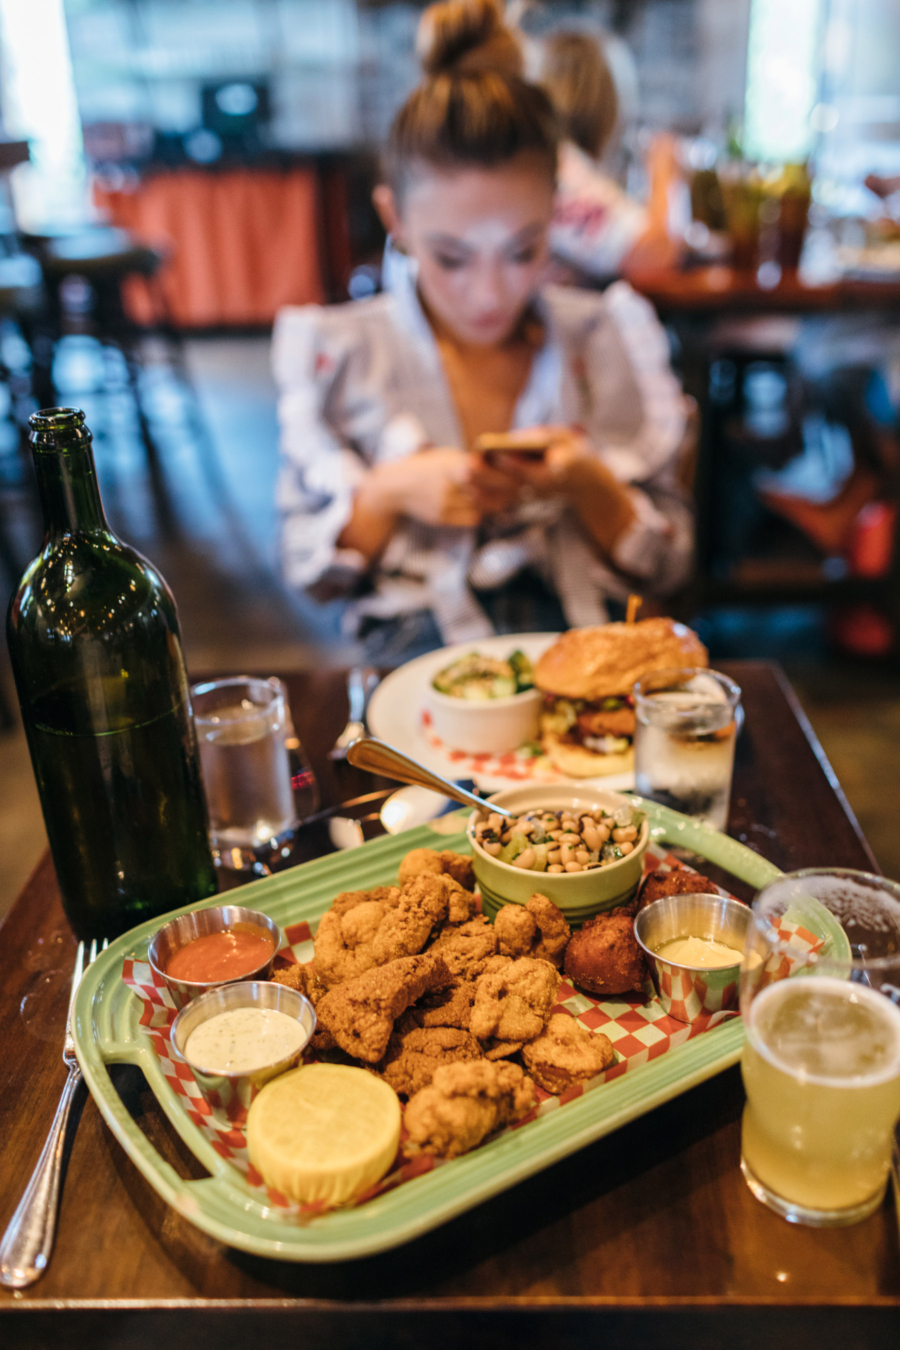 Southern Fried Food - Travel Guide: 36 hours in Charleston, SC // NotJessFashion.com